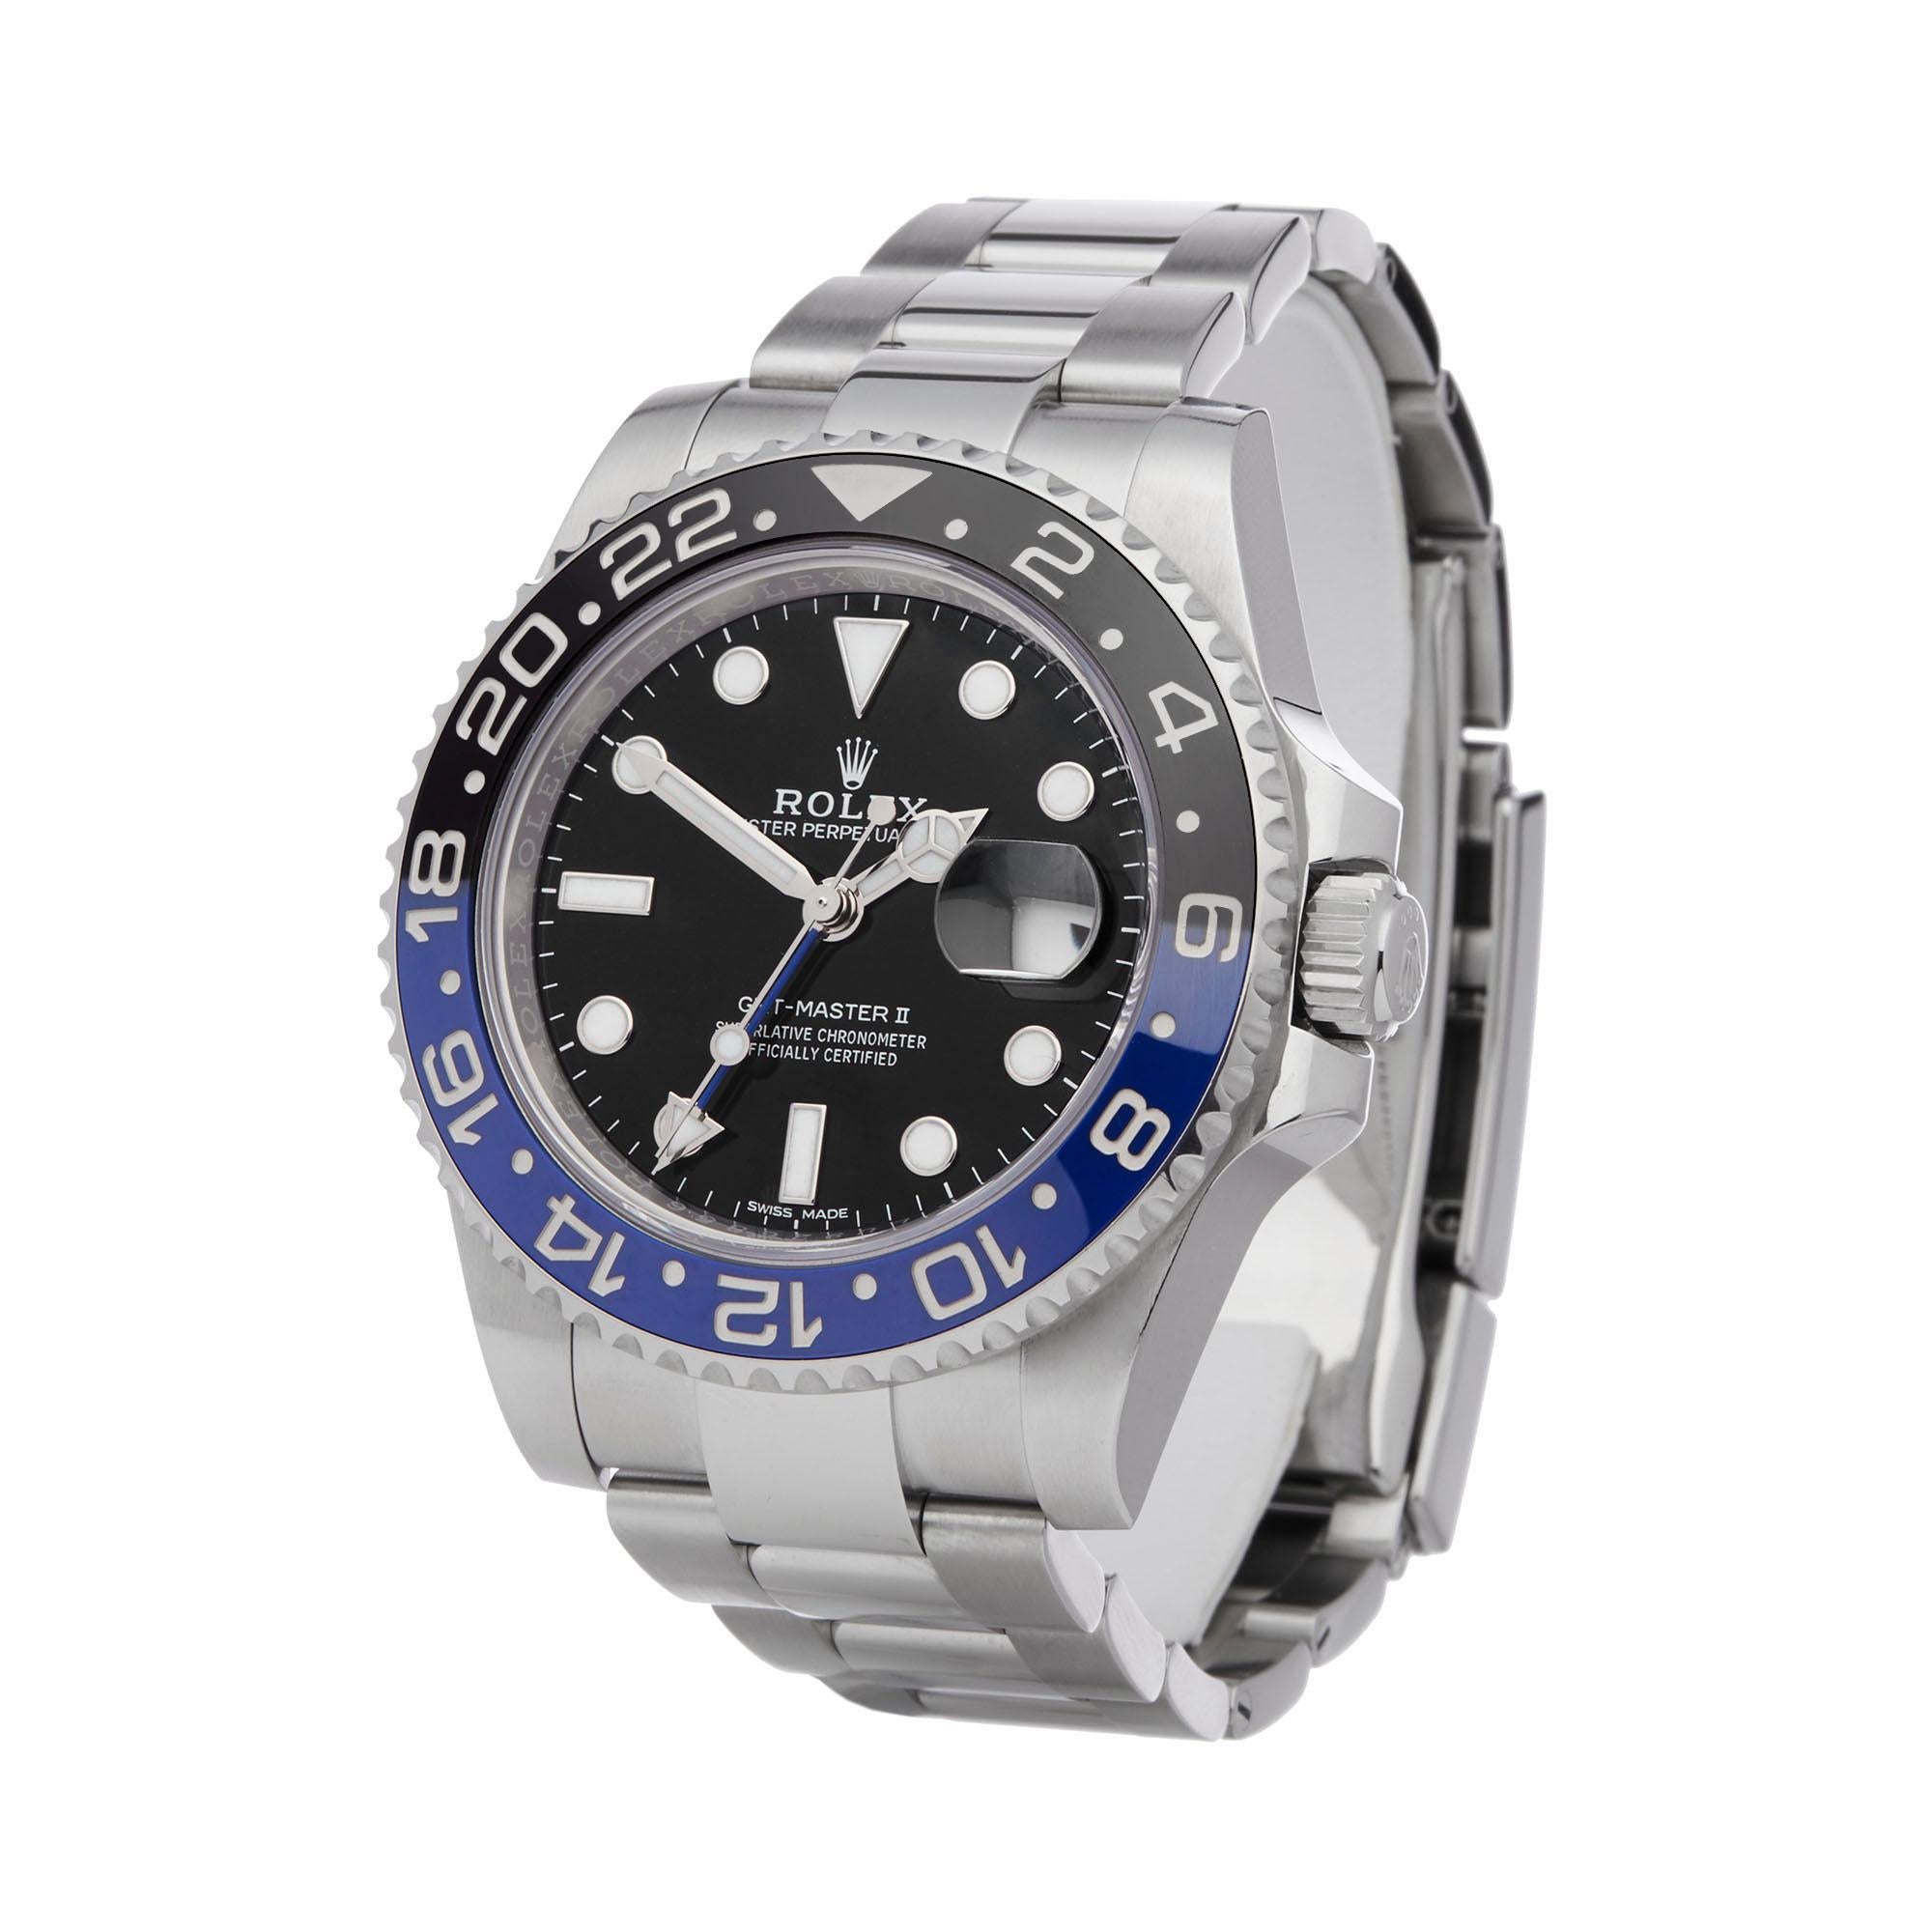 Ref: W6231
Manufacturer: Rolex
Model: GMT-Master II
Model Ref: 116710BLNR
Age: 27th June 2016
Gender: Mens
Complete With: Box & Guarantee
Dial: Black Other
Glass: Sapphire Crystal
Movement: Automatic
Water Resistance: To Manufacturers